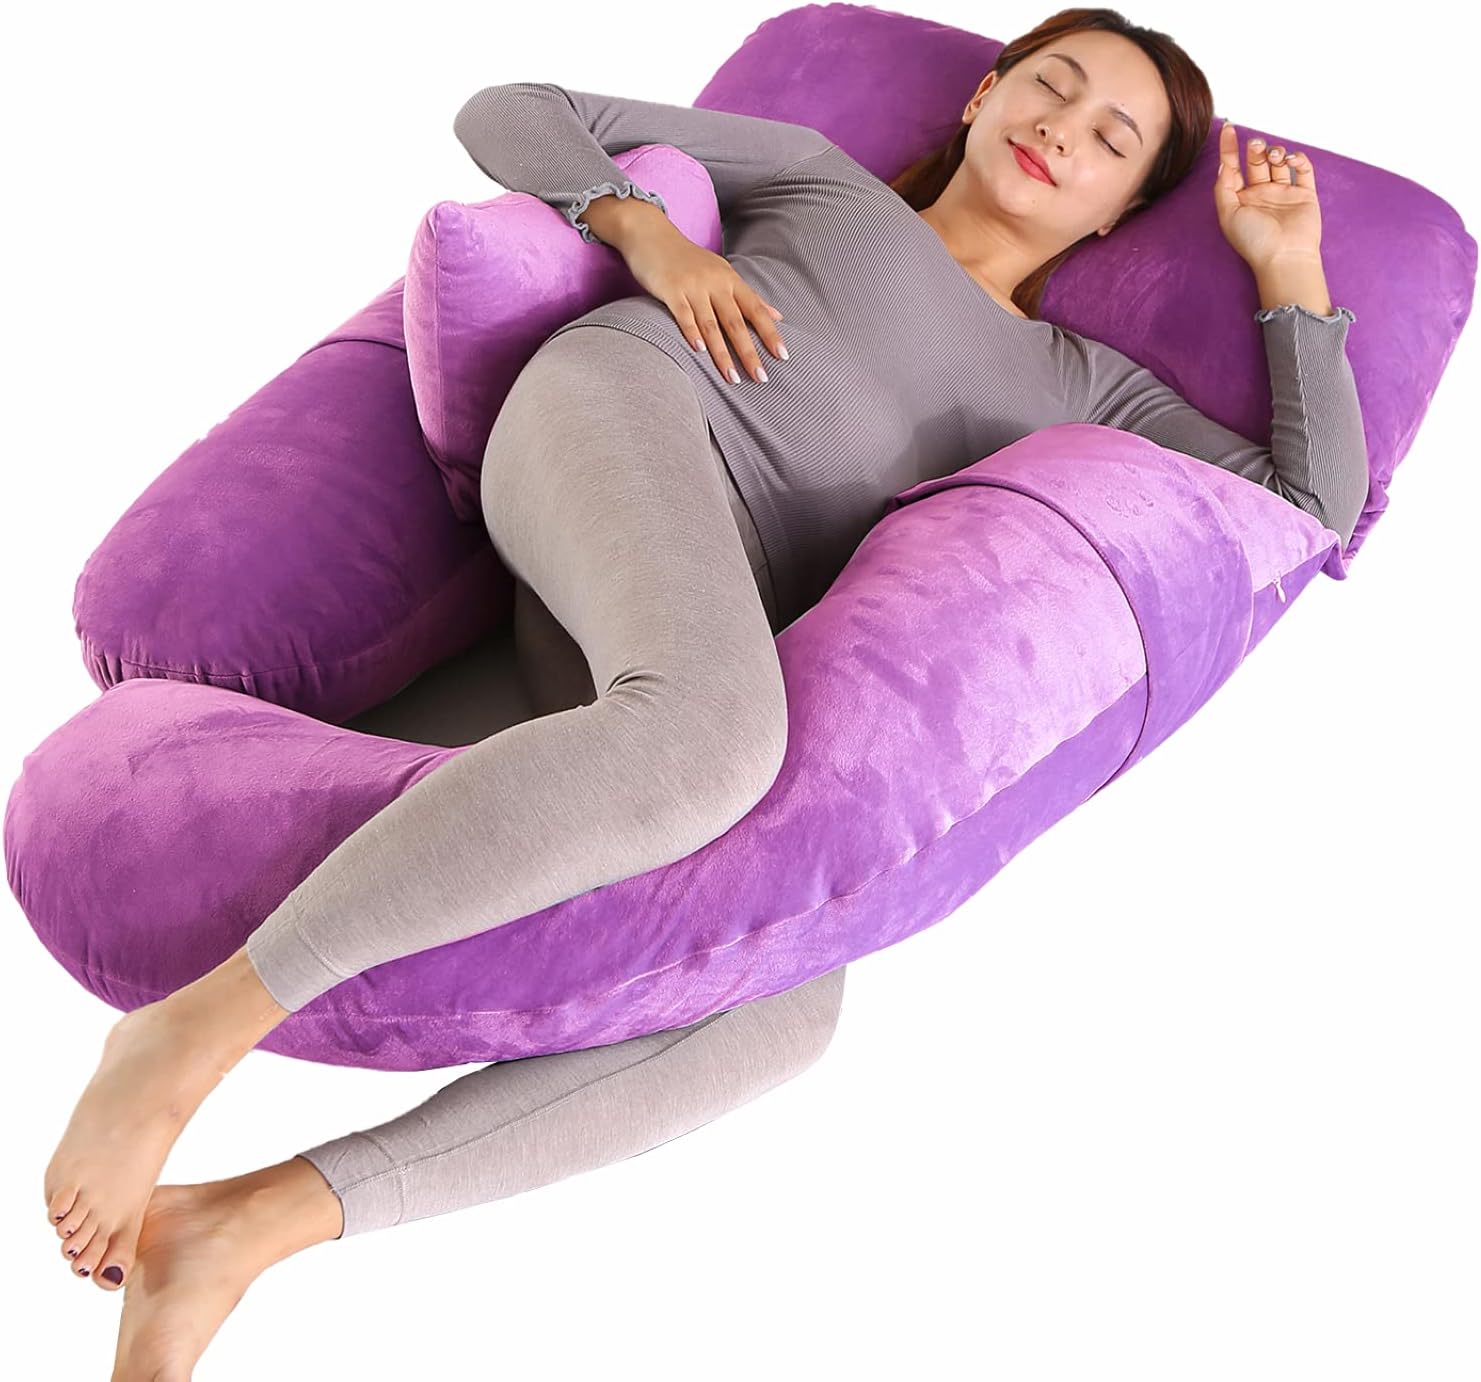 AJIAAIONE Pregnancy Pillow Review